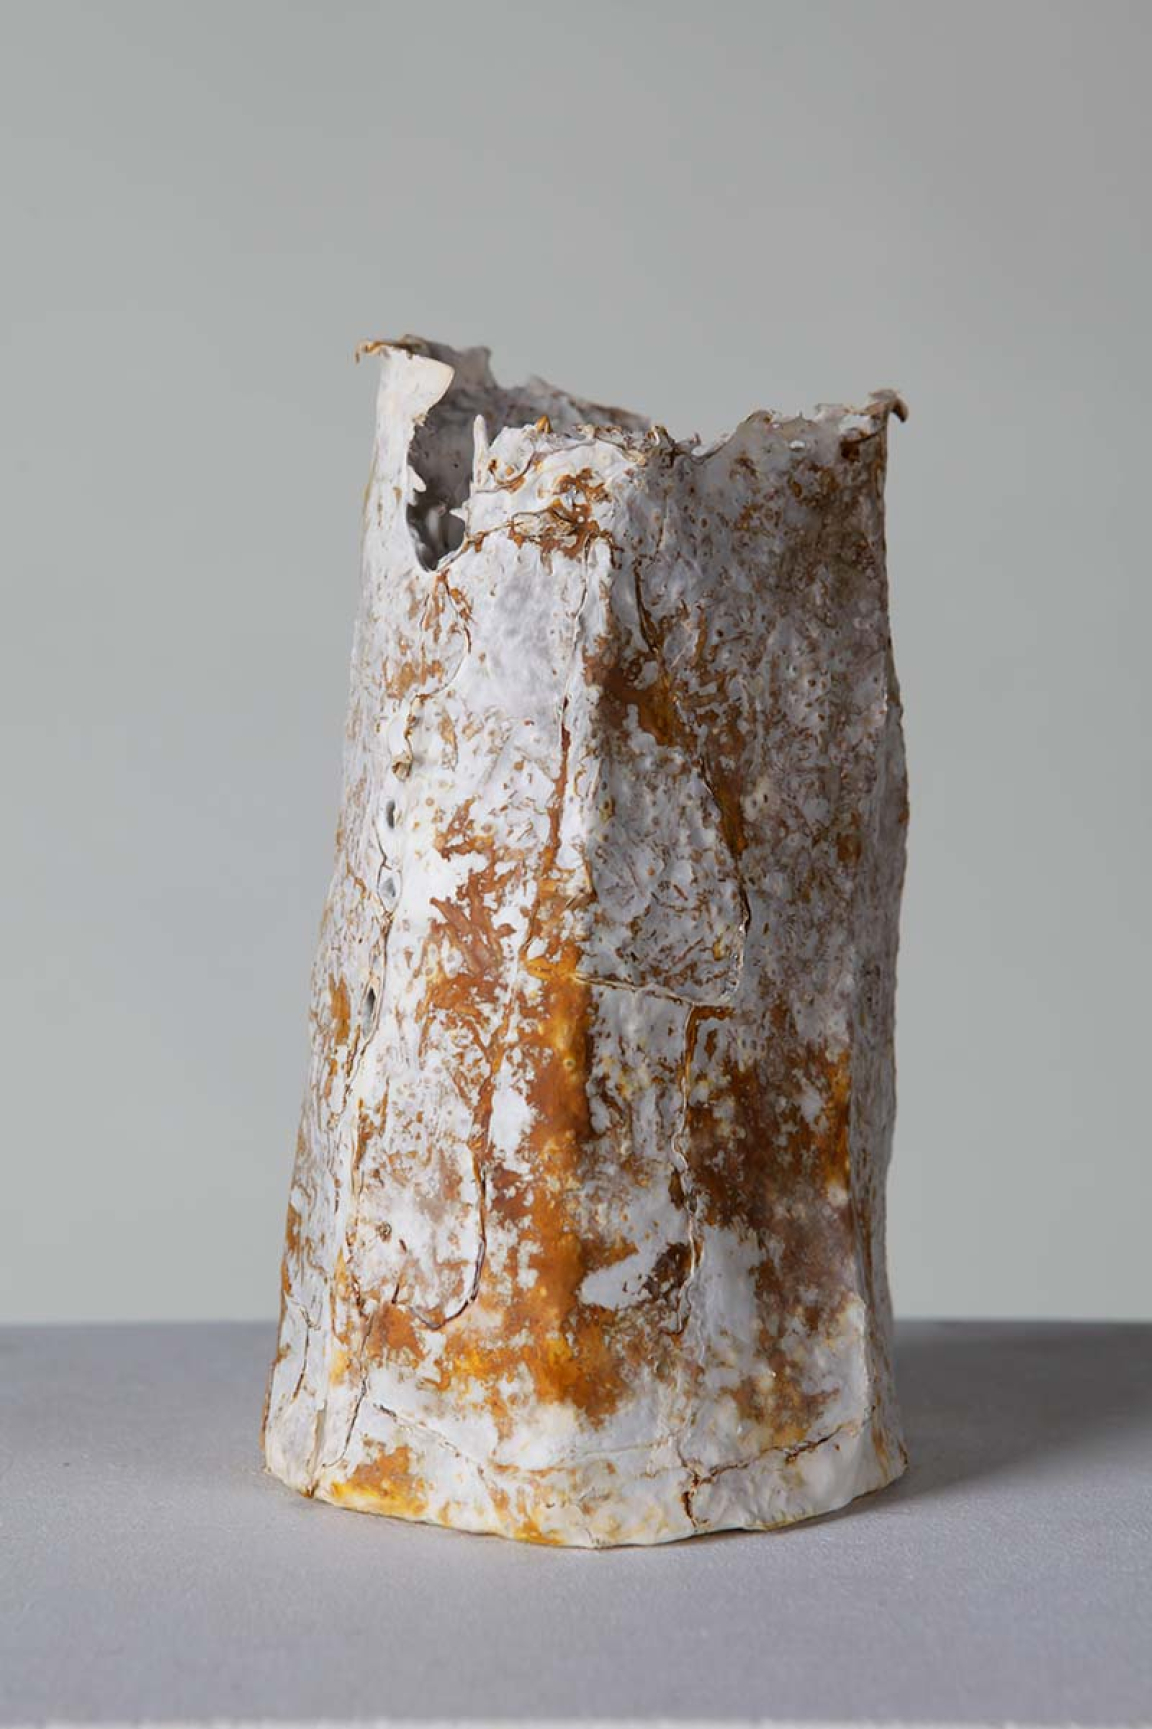 Surrey: Mycelium sculpture grown from reishi millet grain spawn, eucalyptus paper, wheat bran, and yellow clay dug up from Cranleigh, in Surrey.